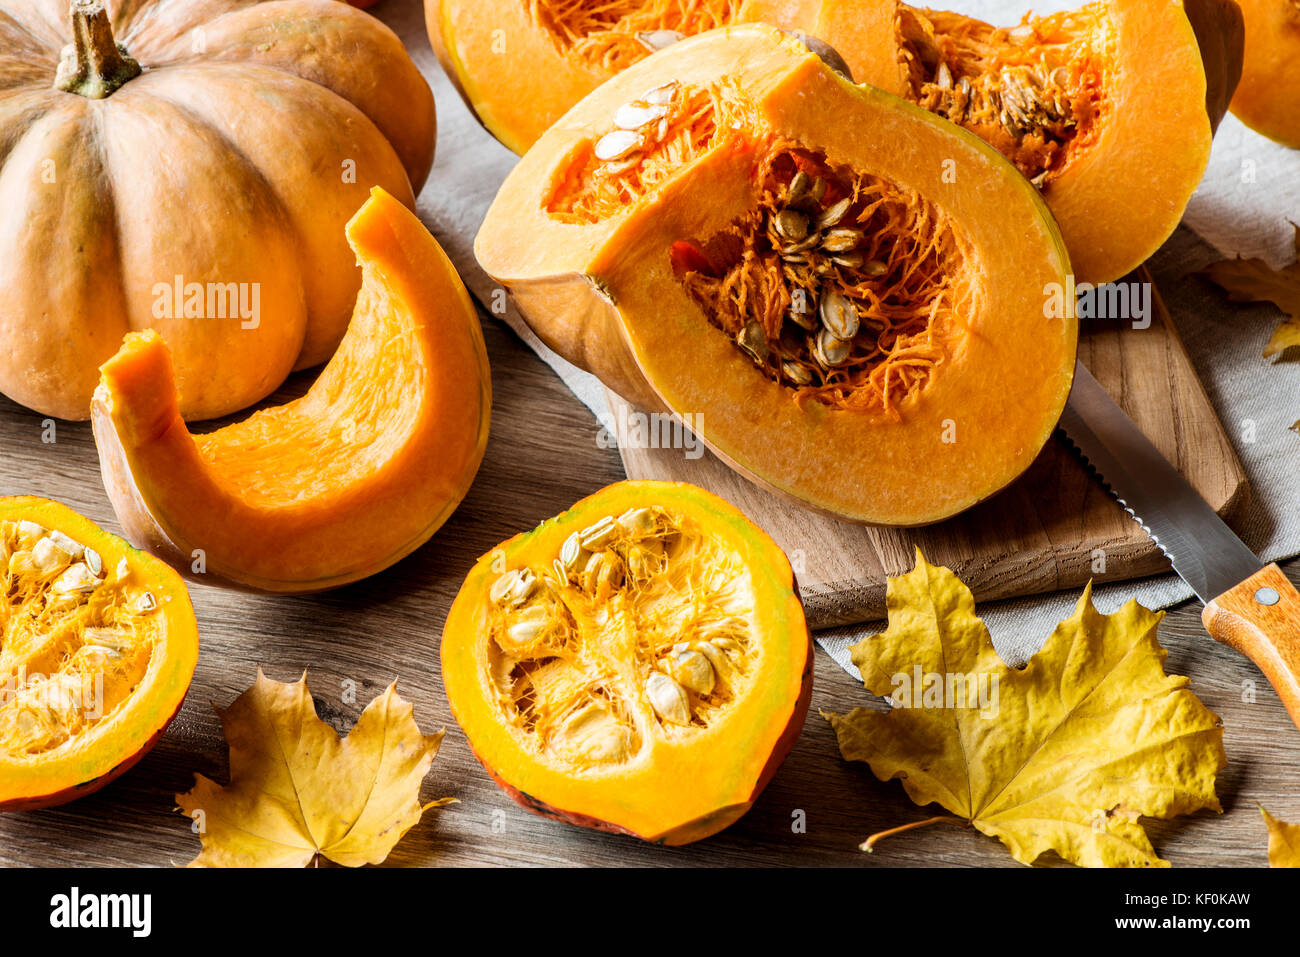 Sliced pumpkin with seeds on a wooden background. Close-up Stock Photo